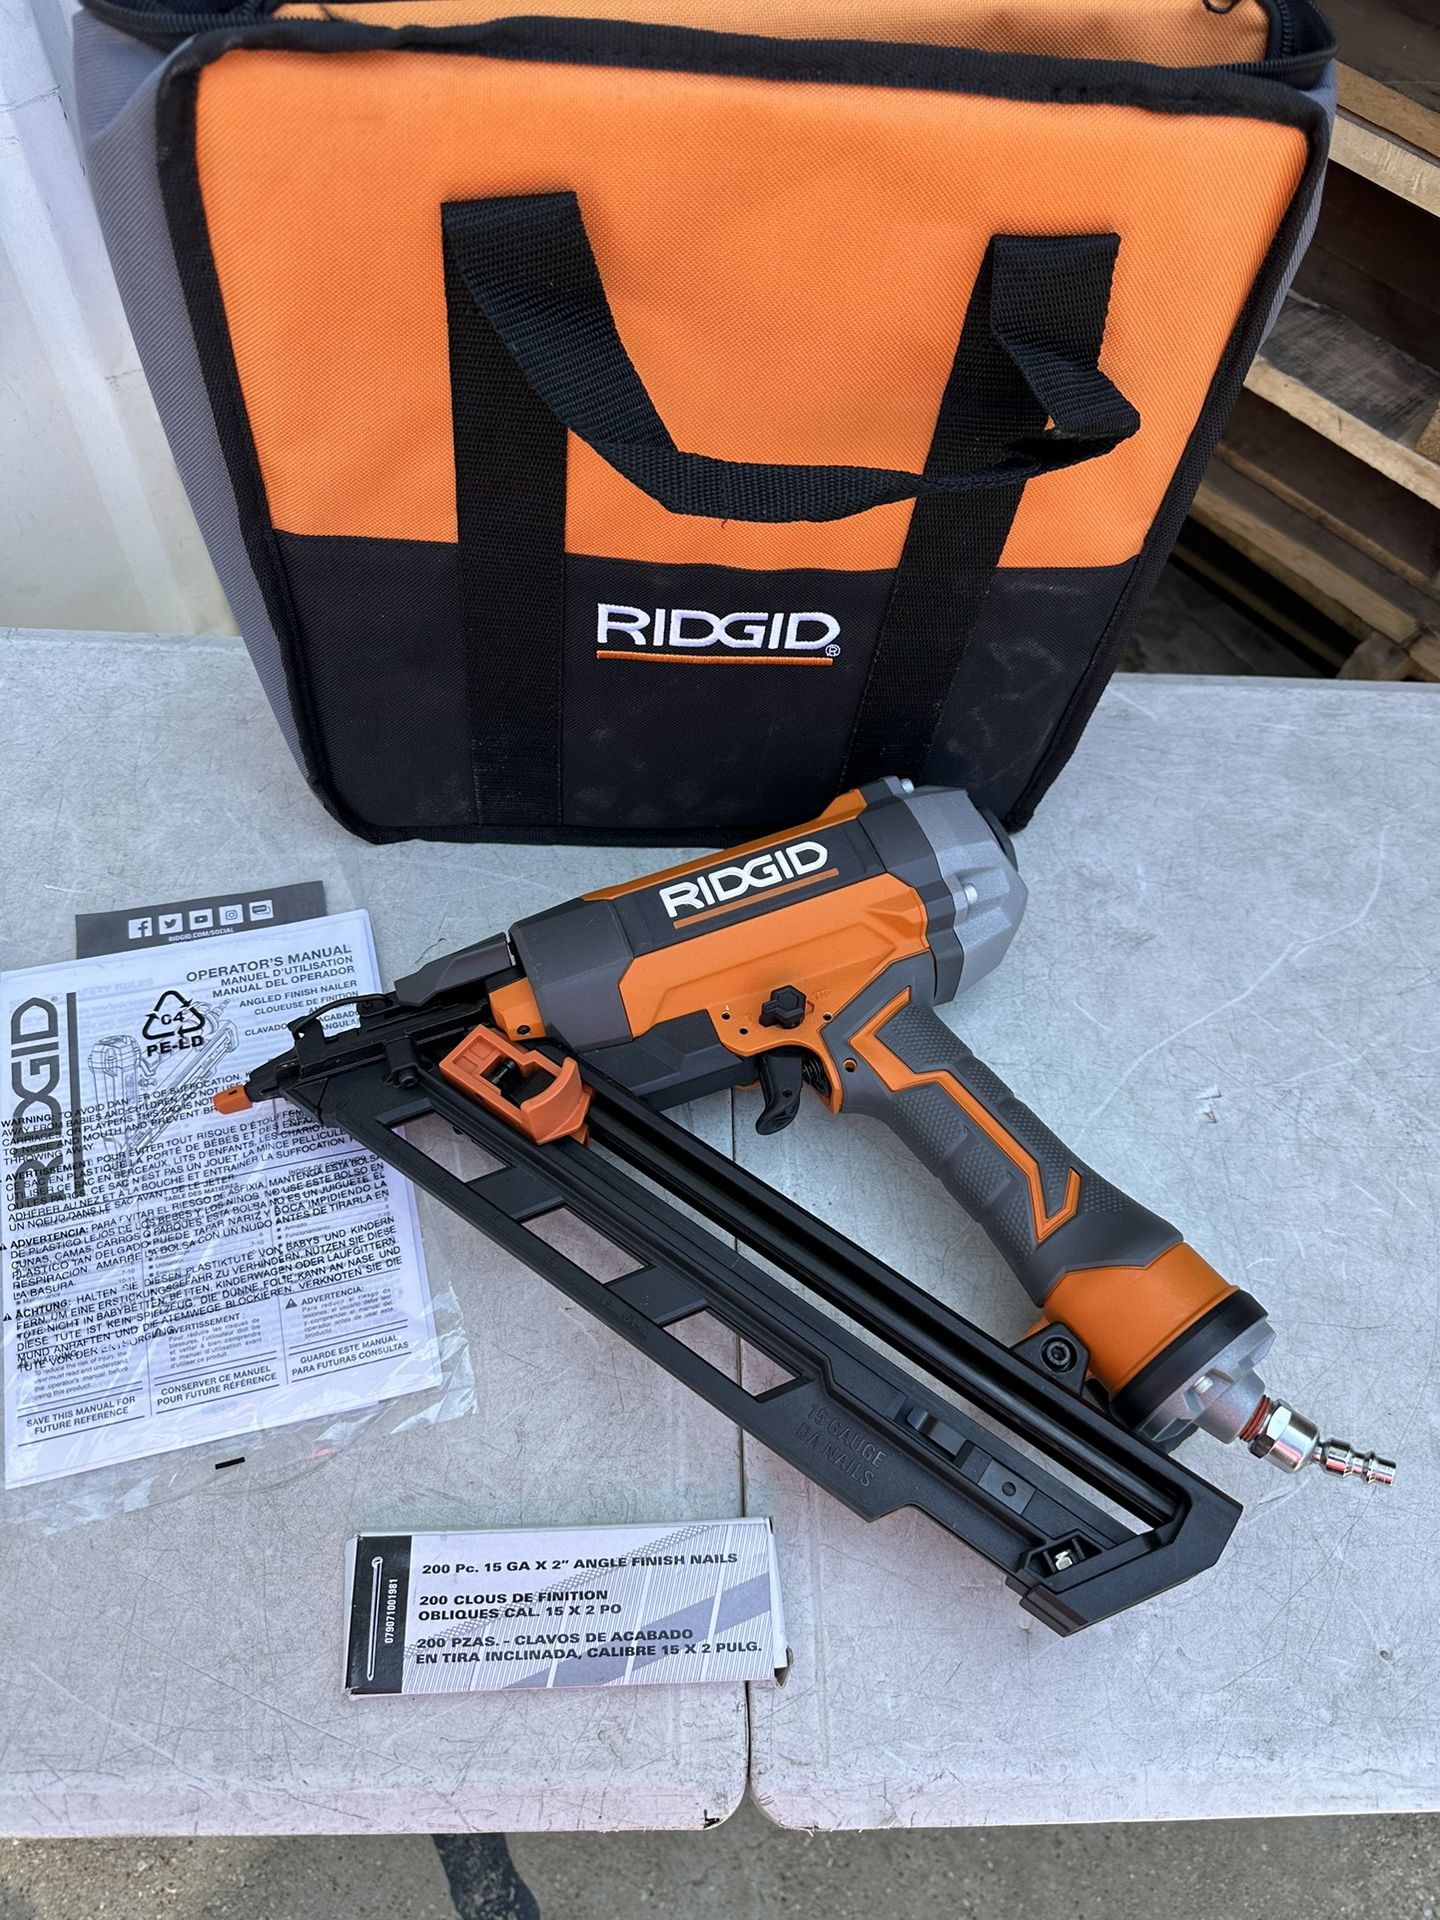 RIDGID Pneumatic 15-Gauge 2-1/2 in. Angled Finish Nailer with CLEAN DRIVE Technology, New $85